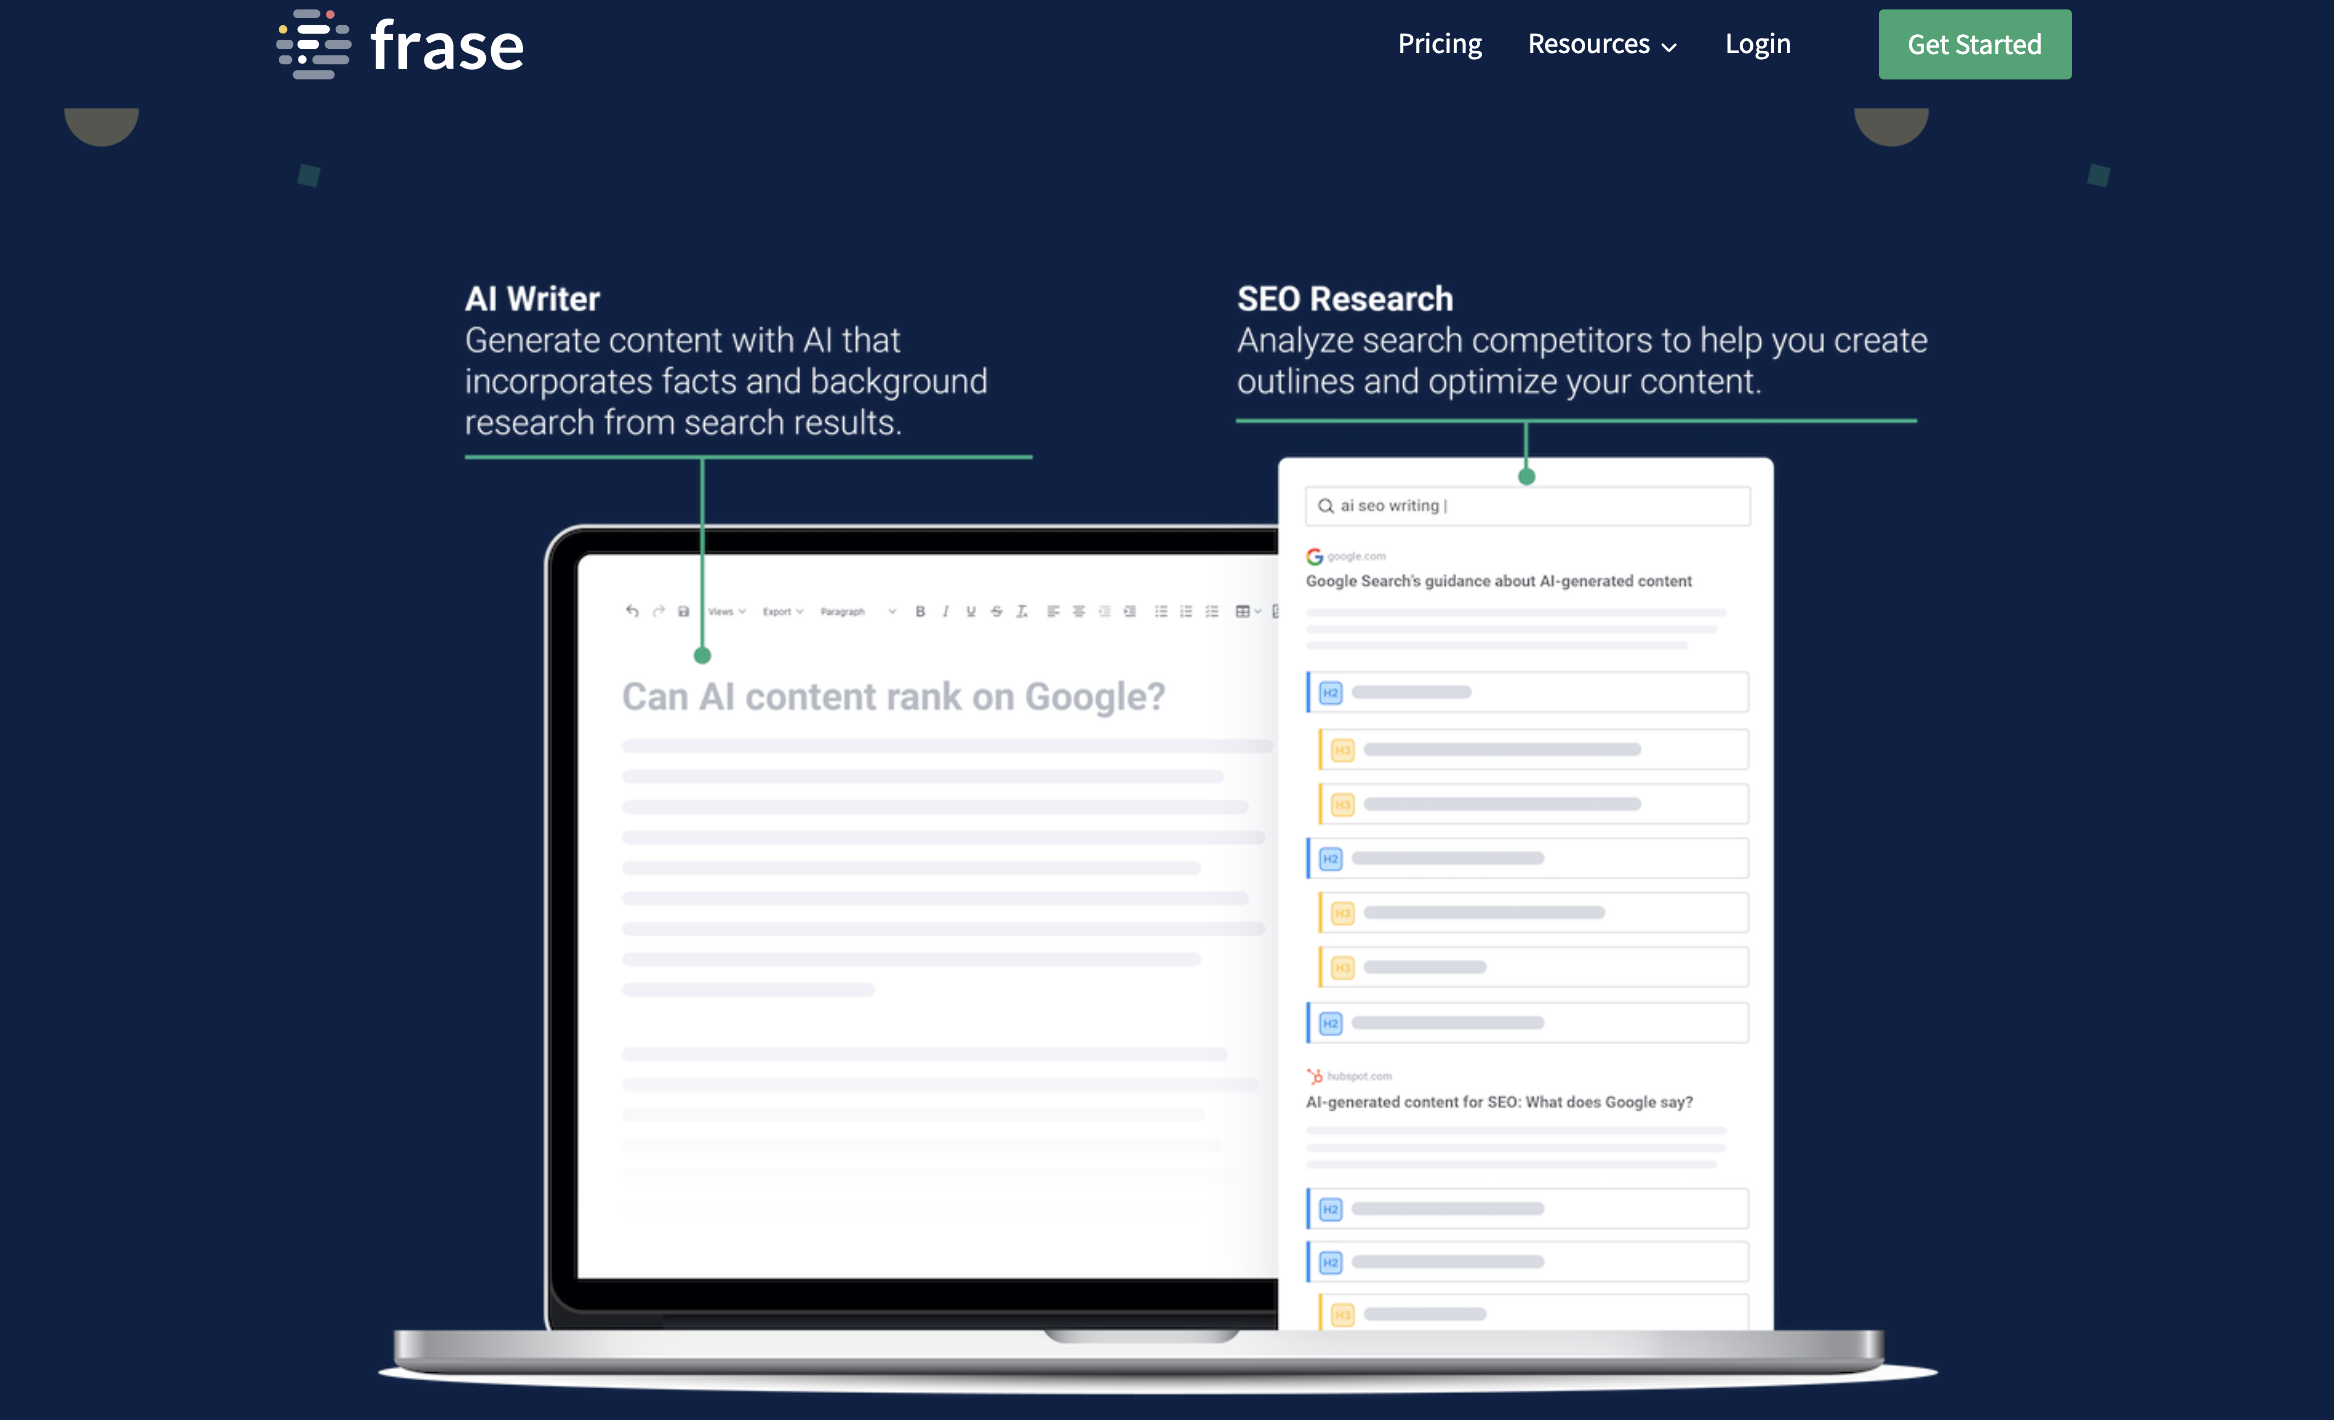 Screenshot of the home page of the Frase.io 